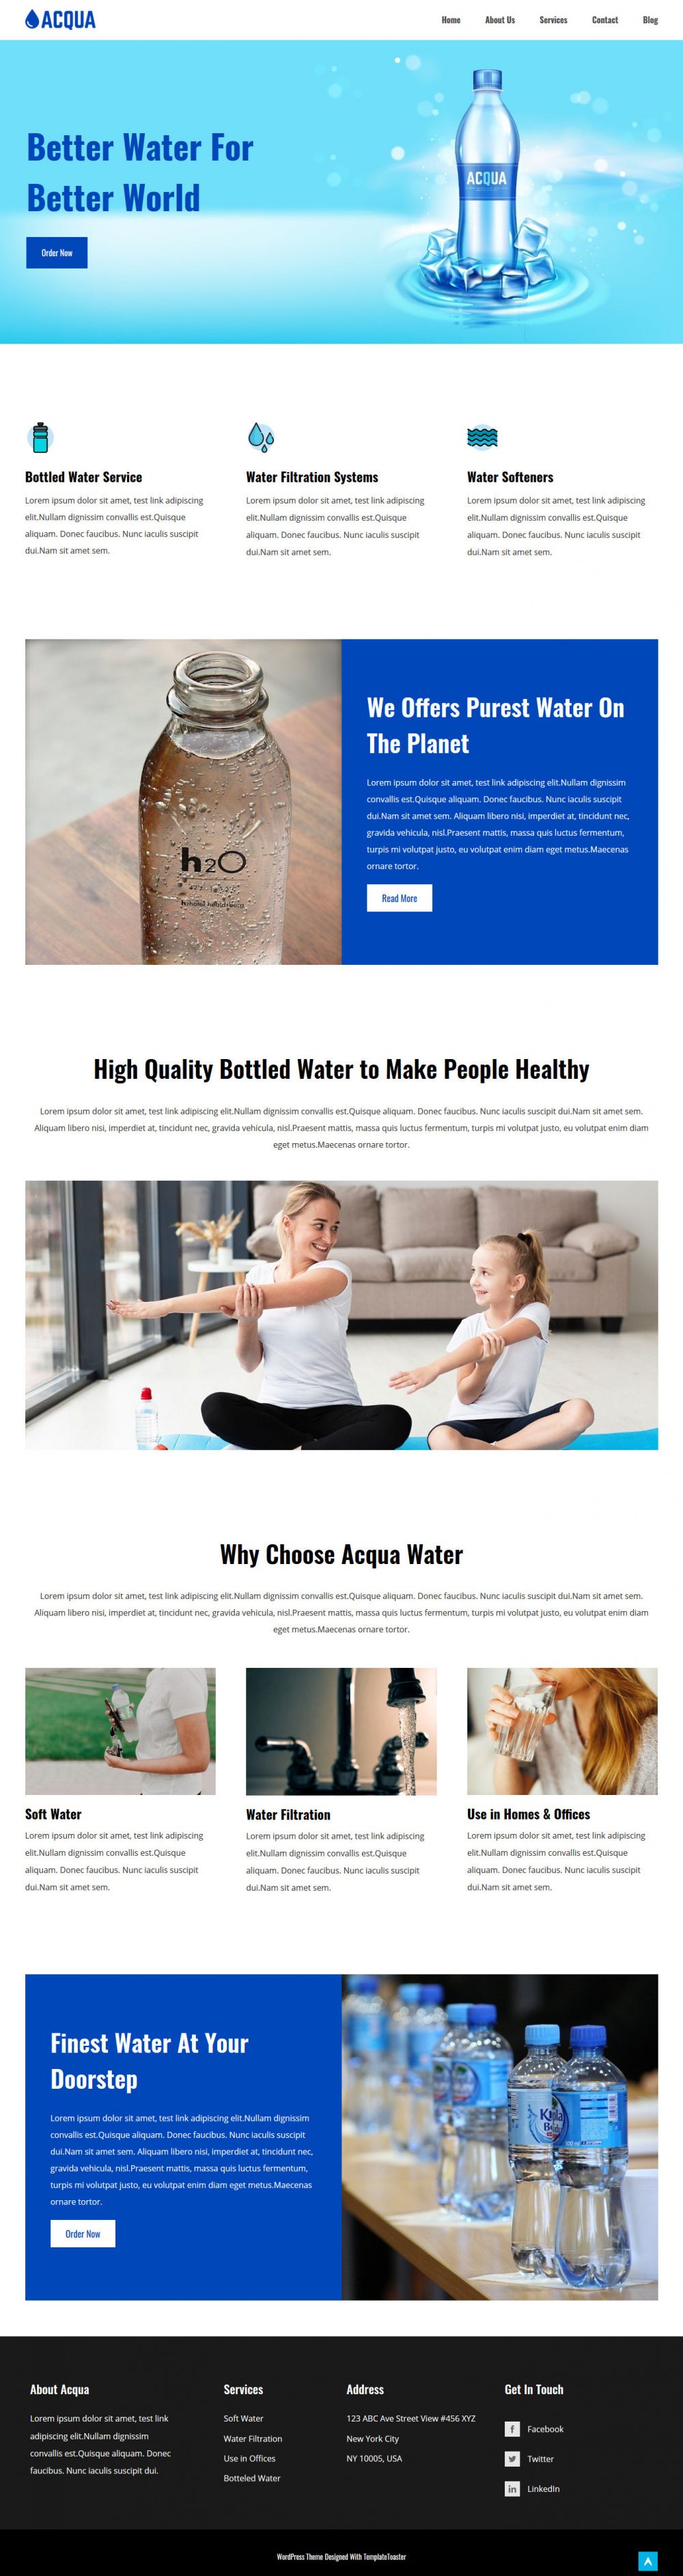 acqua water purifier and delivery wordpress theme